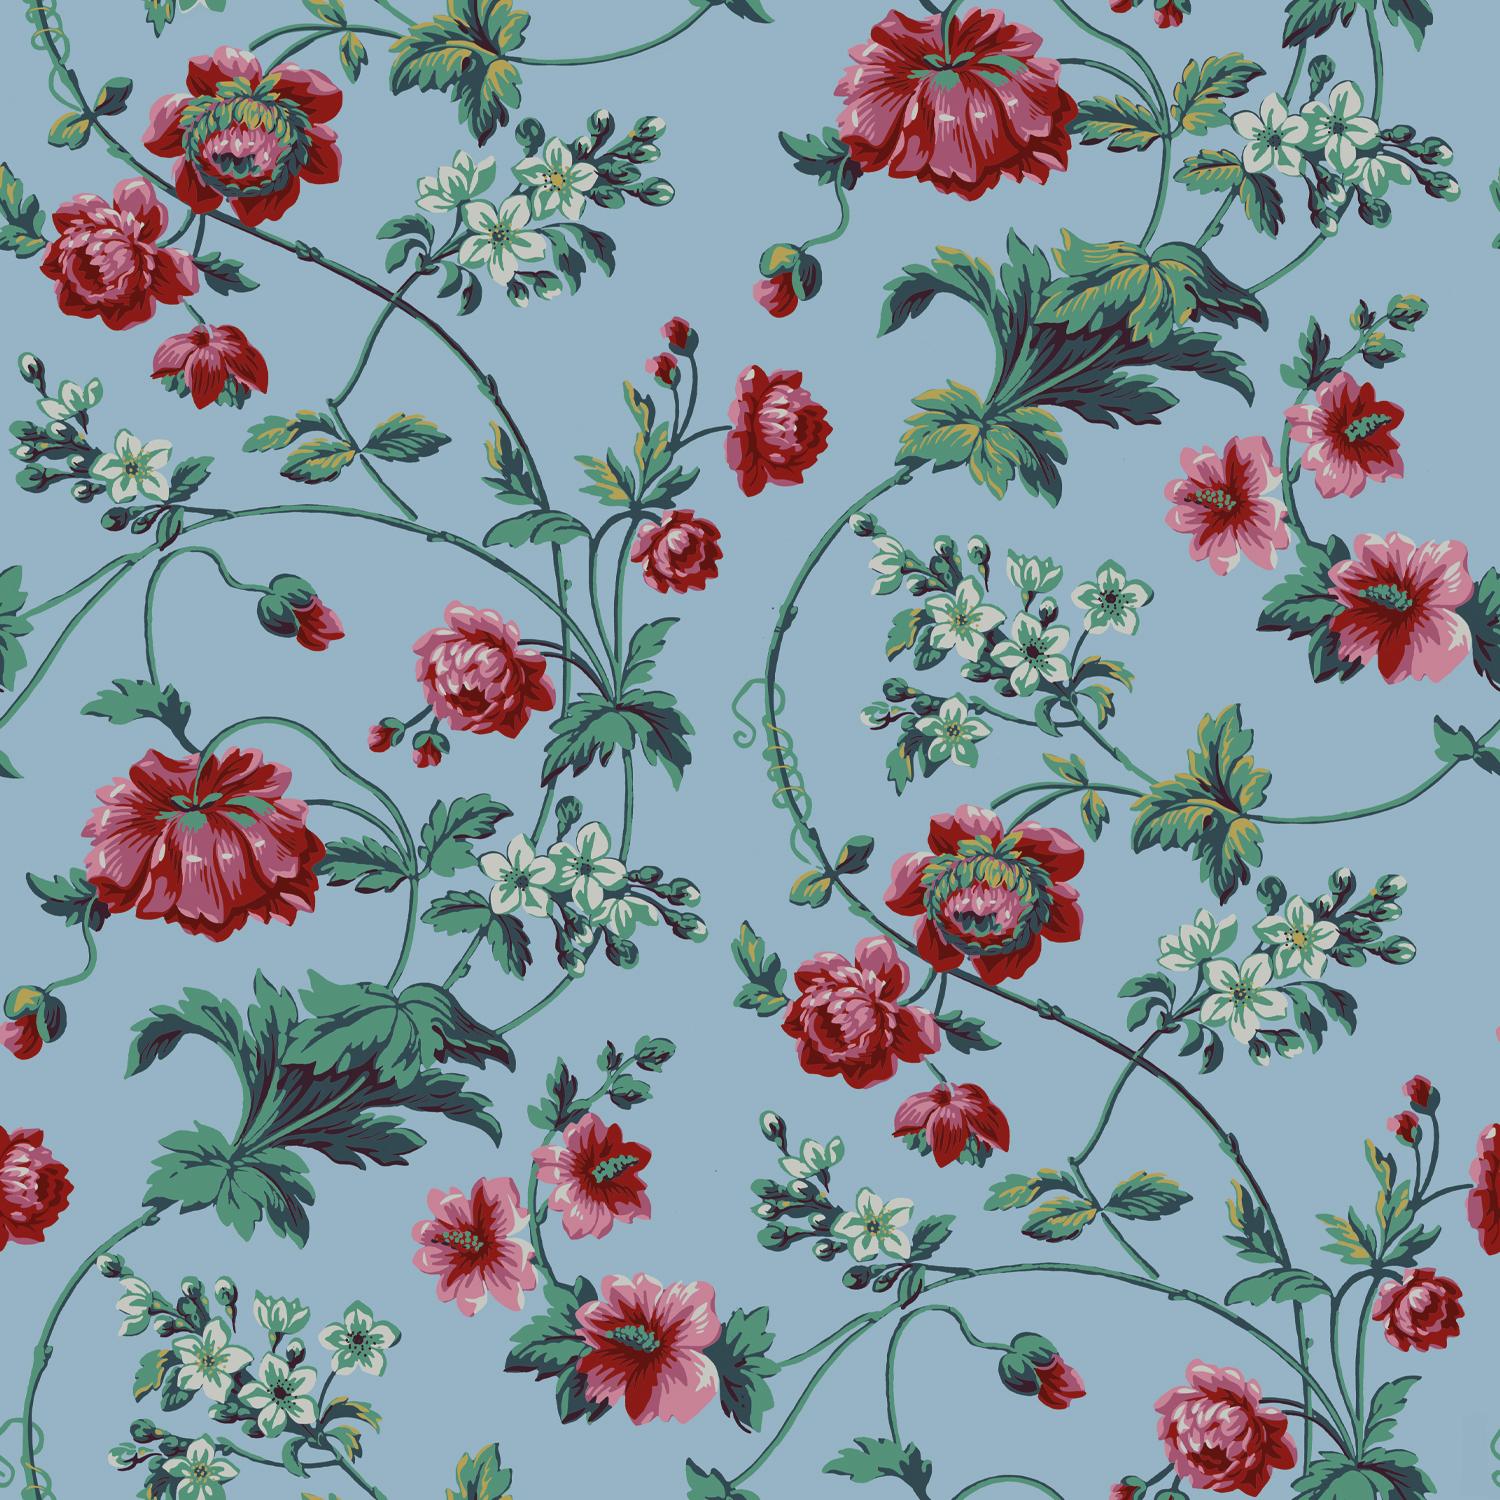 Repeat: 70 cm / 27.6 in

Founded in 2019, the French wallpaper brand Papier Francais is defined by the rediscovery, restoration, and revival of iconic wallpapers dating back to the French “Golden Age of wallpaper” of the 18th and 19th centuries.